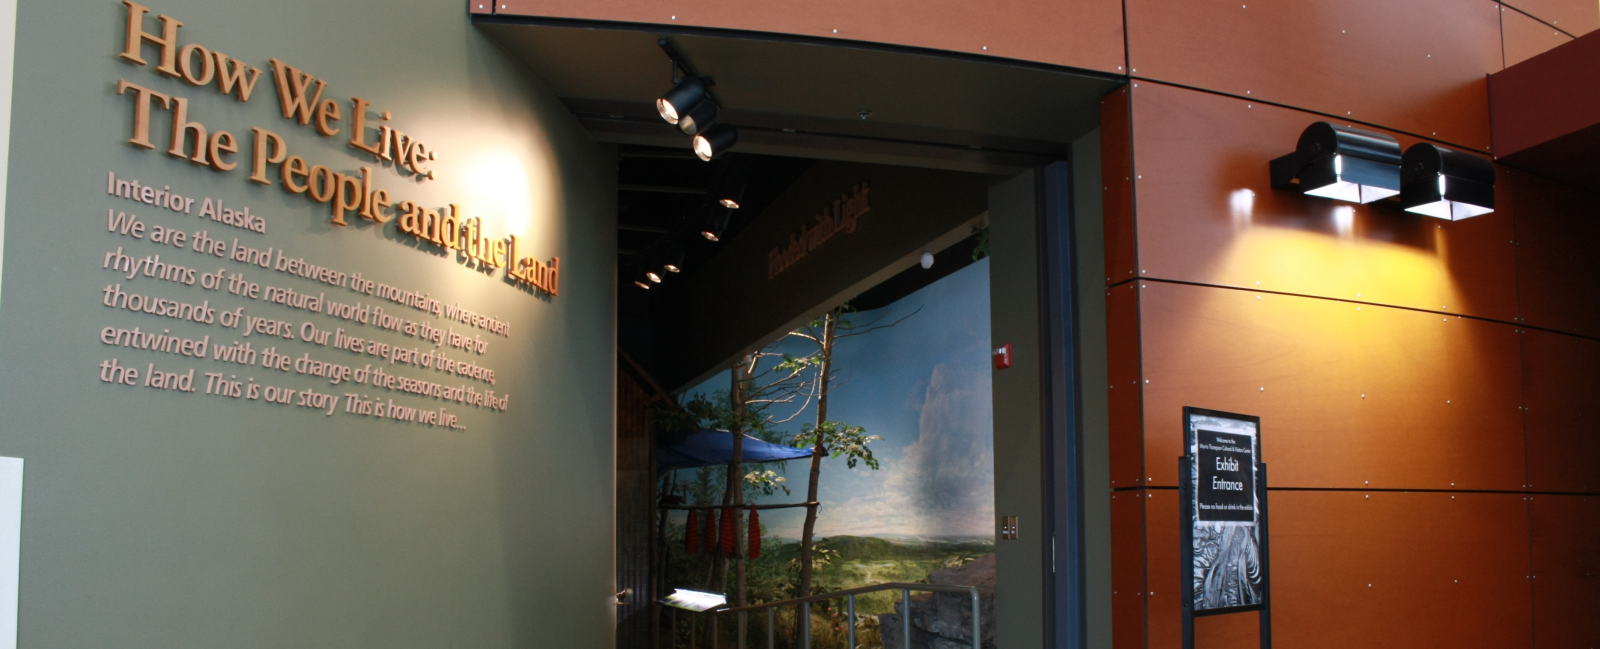 The exhibit entrance is surrounded by green wall with text on the left and a wooden wall on the right.